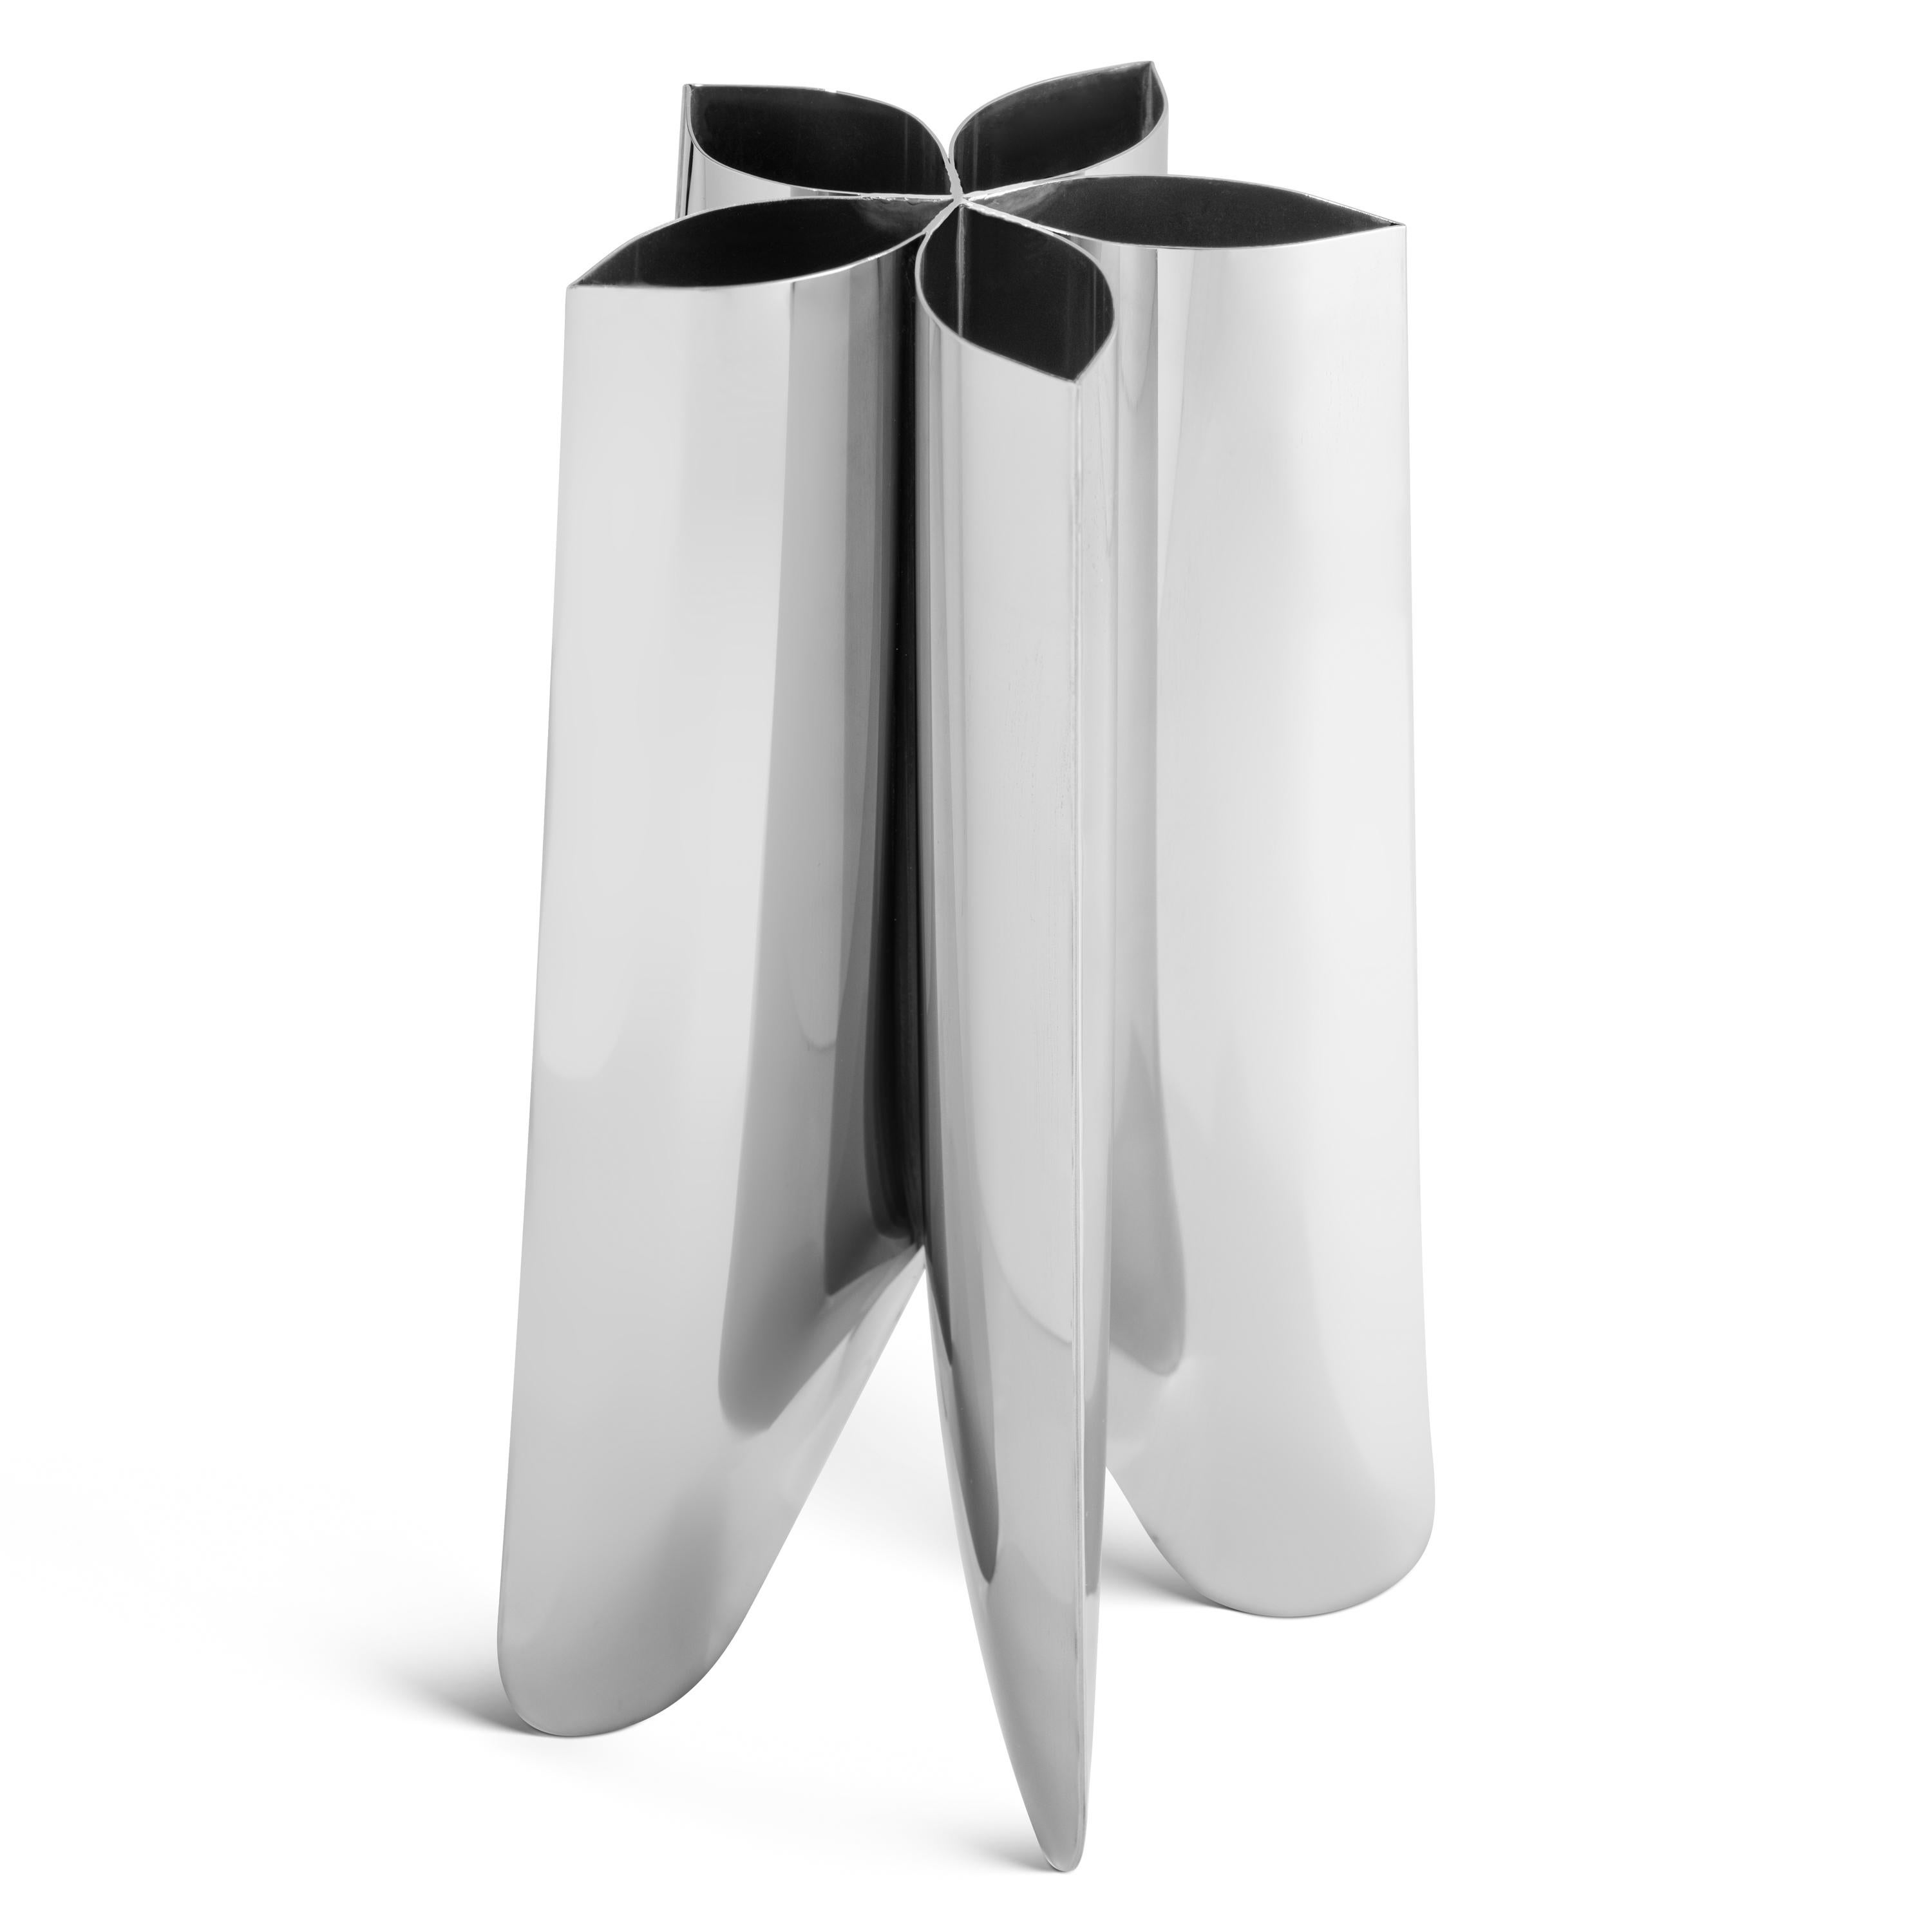 Polished Contemporary Vase, 'Rotation Vase' by Zieta, Large, Stainless Steel For Sale